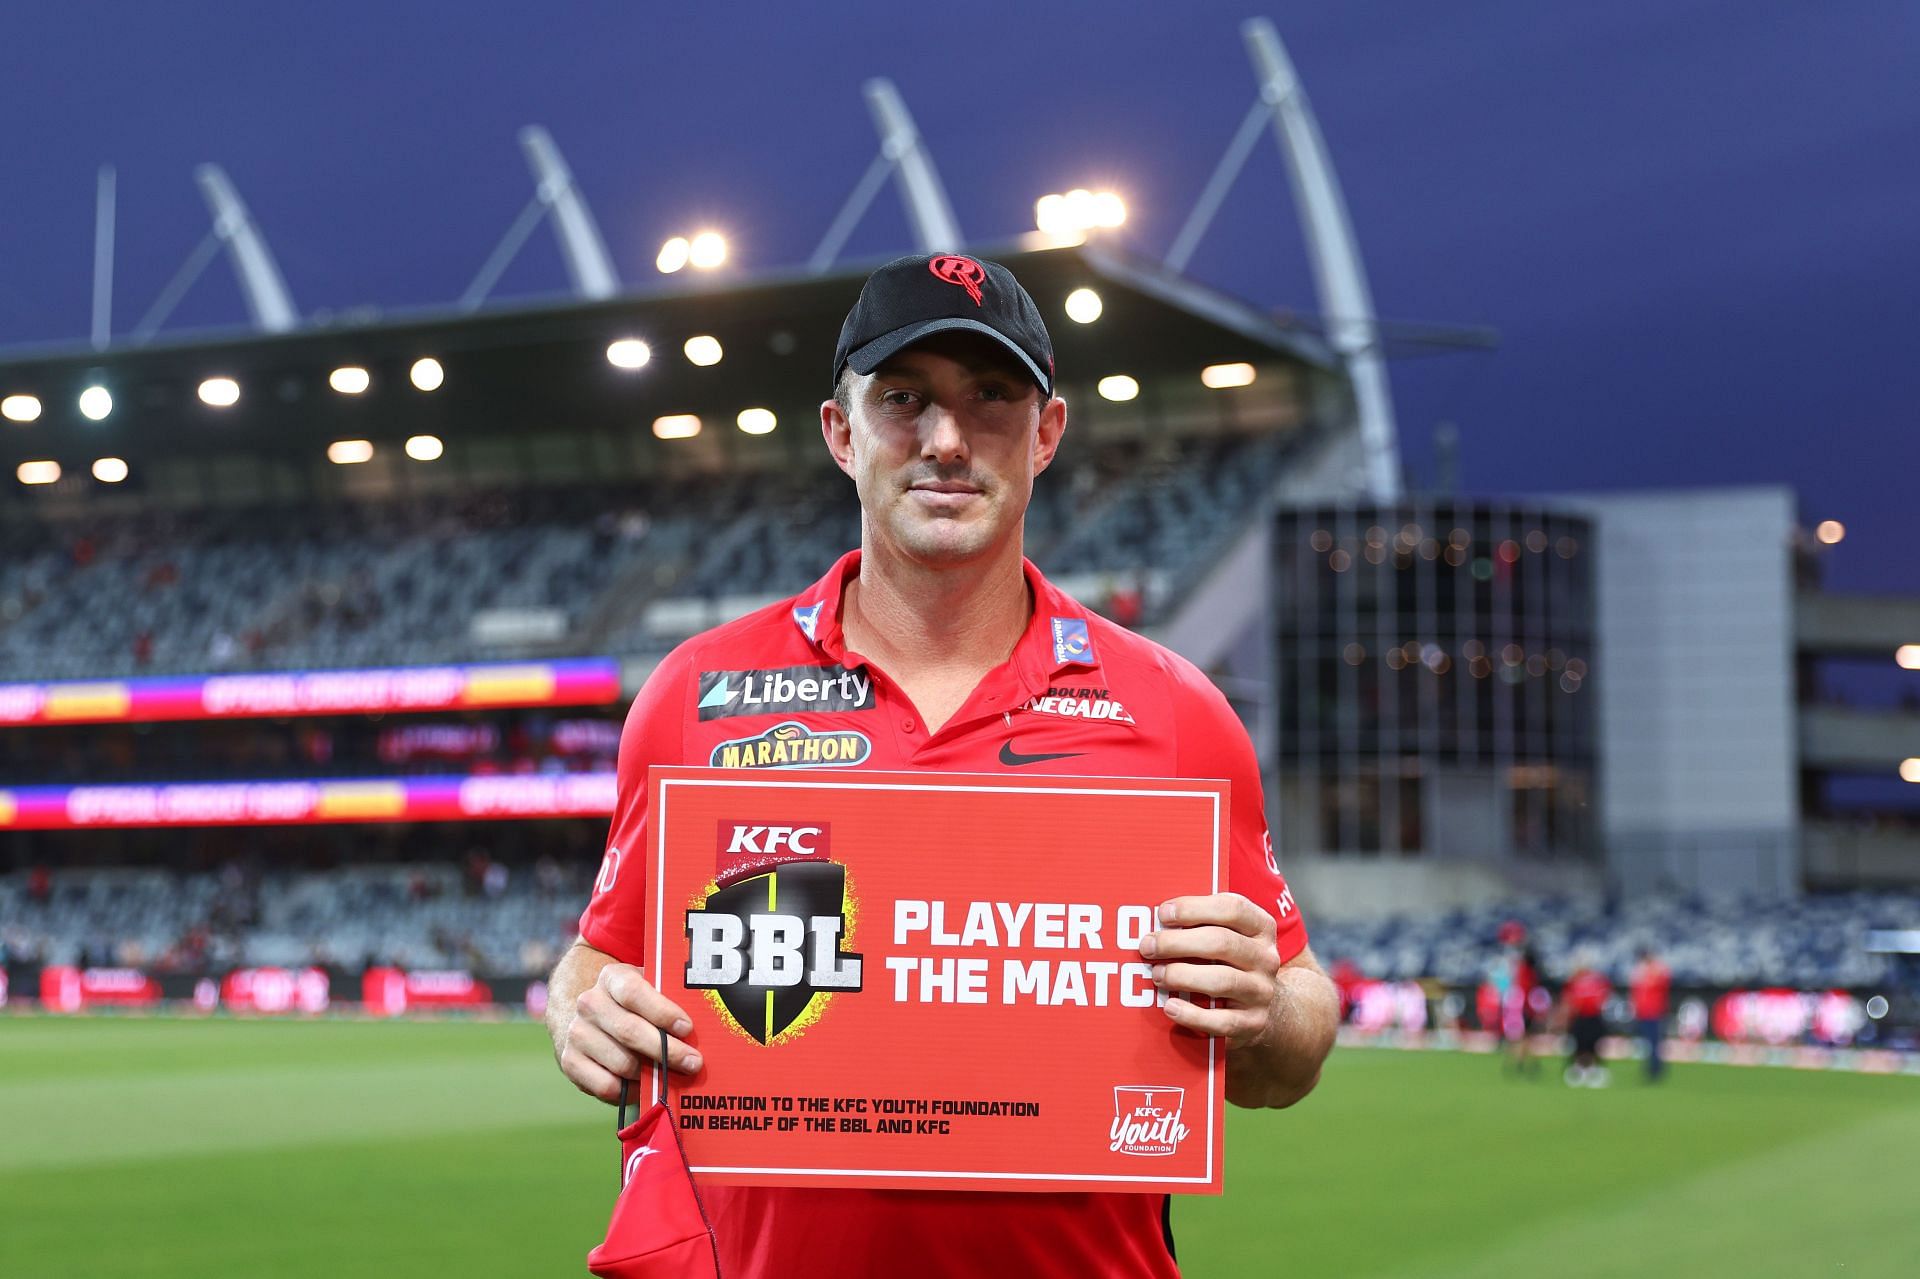 Big Bash League 2021, Melbourne Renegades vs Sydney Thunder Probable XIs, Match Prediction, Weather Forecast, Pitch Report and Live Streaming Details